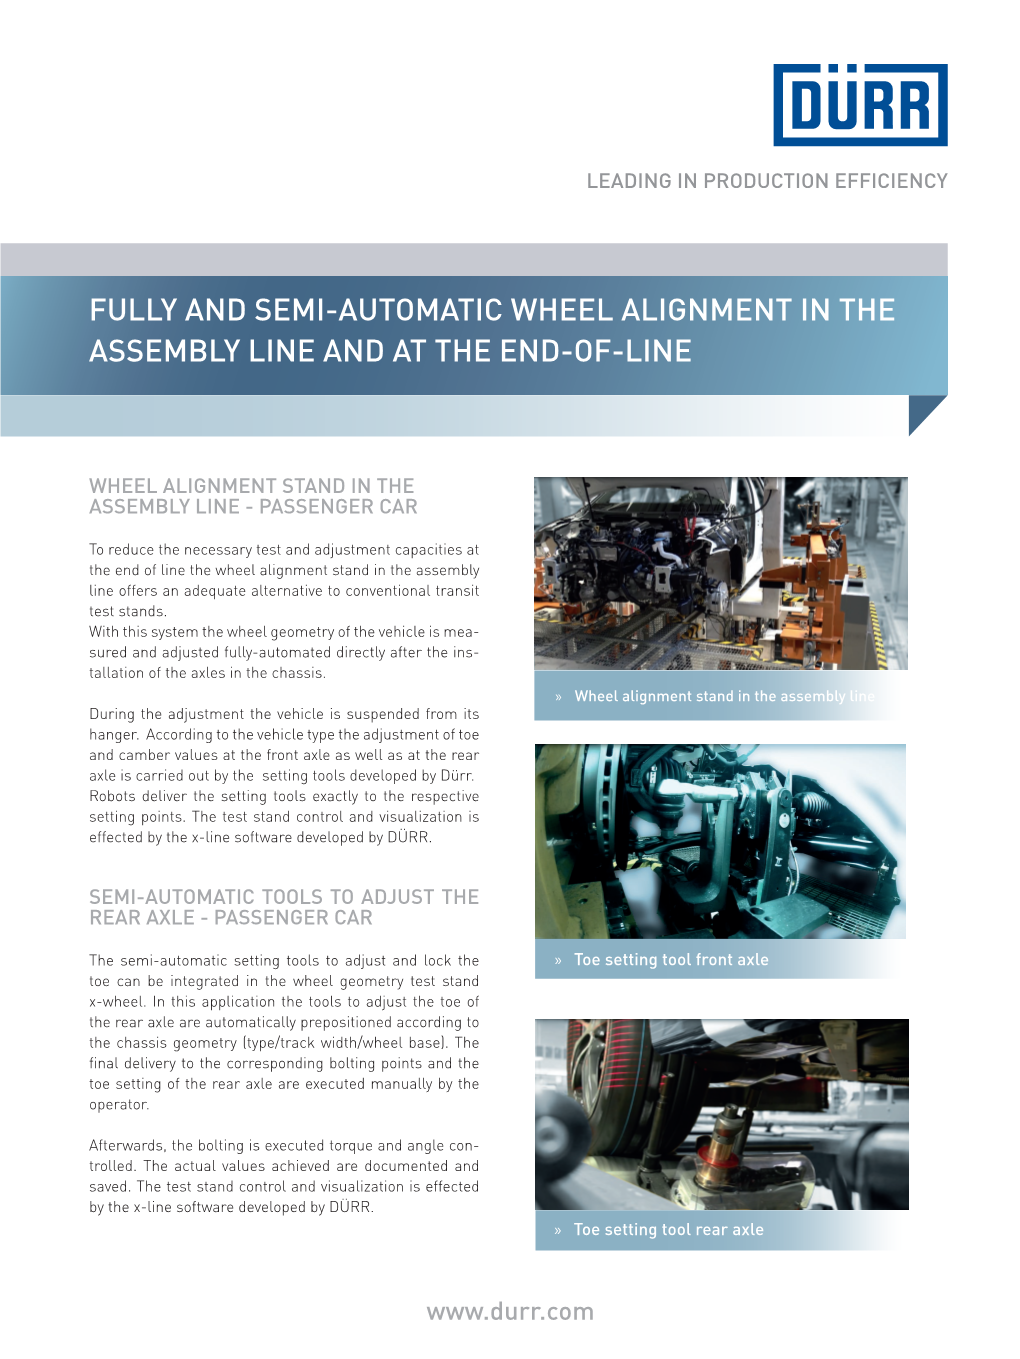 Fully and Semi-Automatic Wheel Alignment in the Assembly Line and at the End-Of-Line